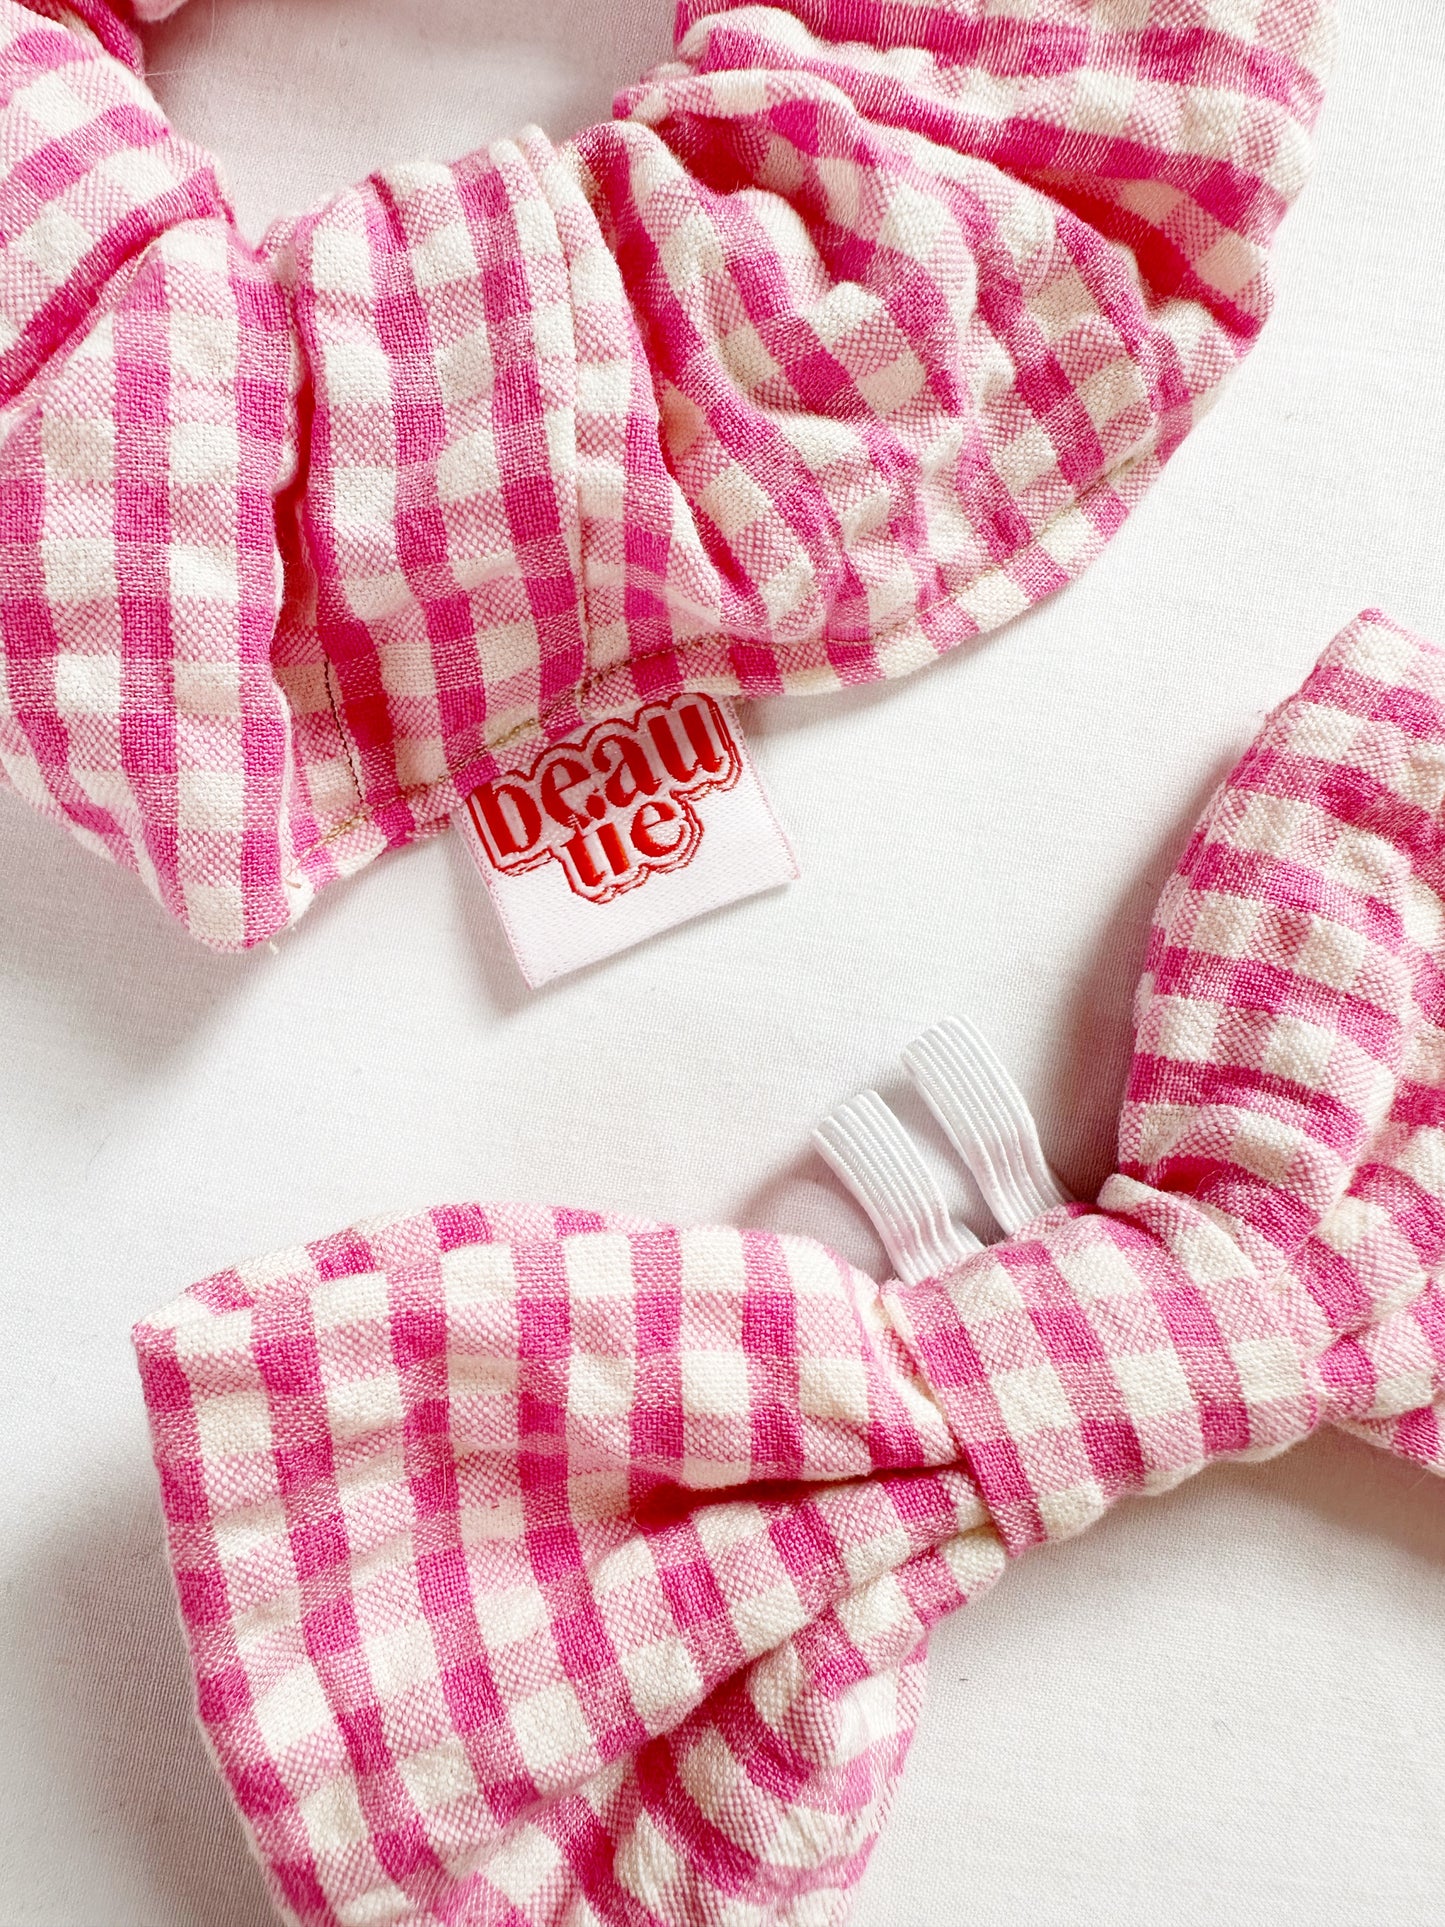 Scrunchie & dog bow tie gift set in pink gingham